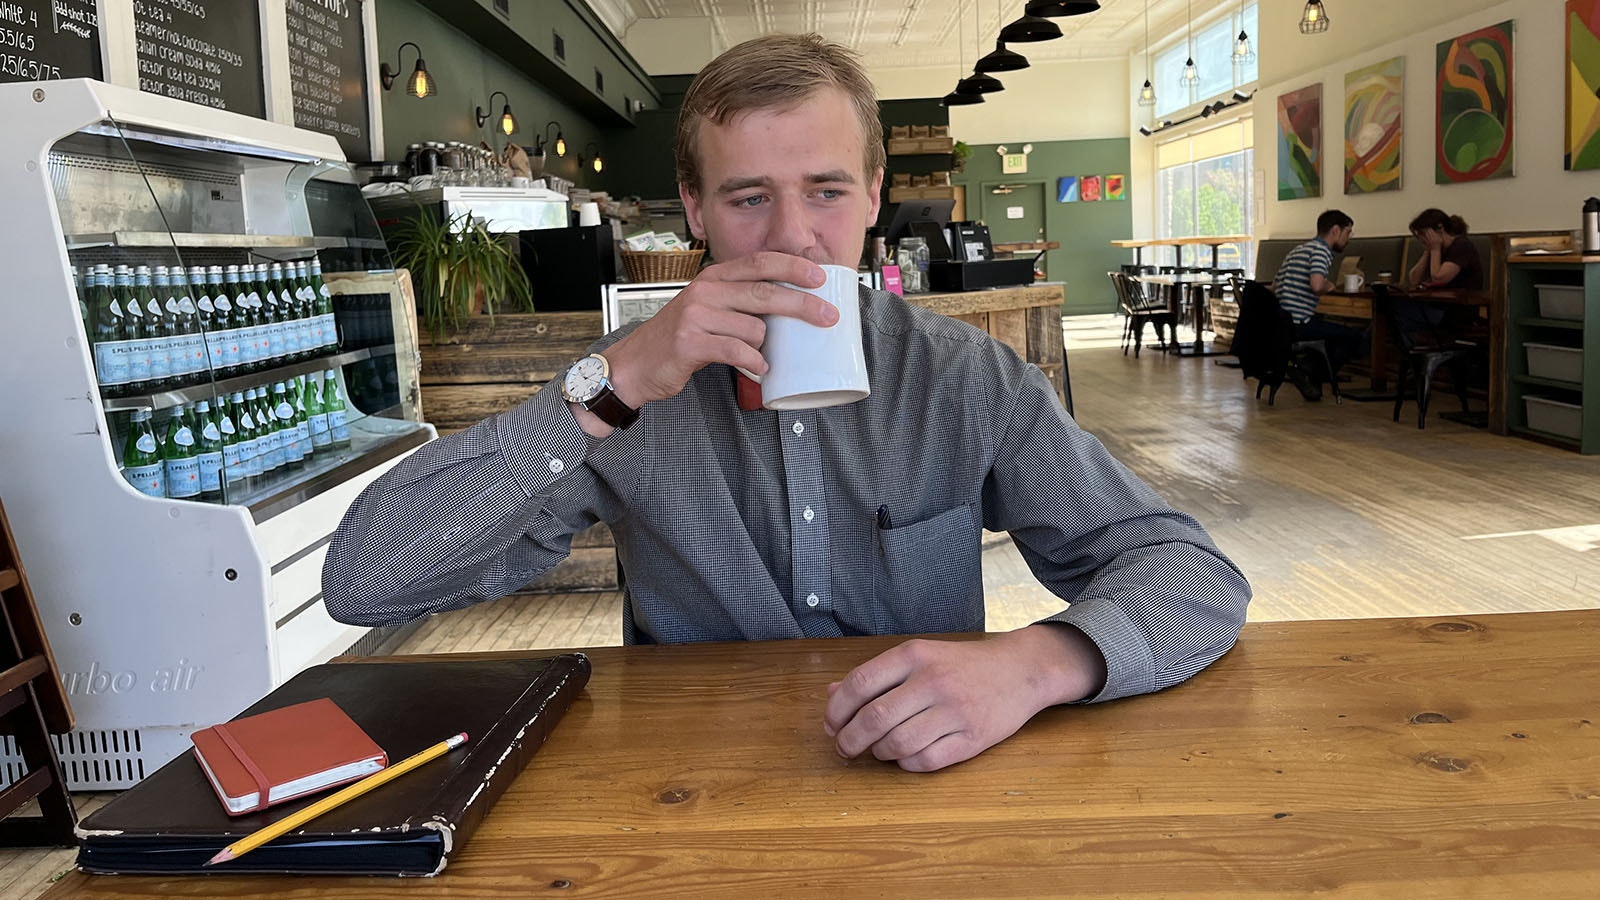 Kolya Sidloski, a Wyoming Catholic College student, in a contemplative mood at Sinks Coffee in Lander. Like all other WCC students, Sidloski gives up his cellphone for four years while attending.